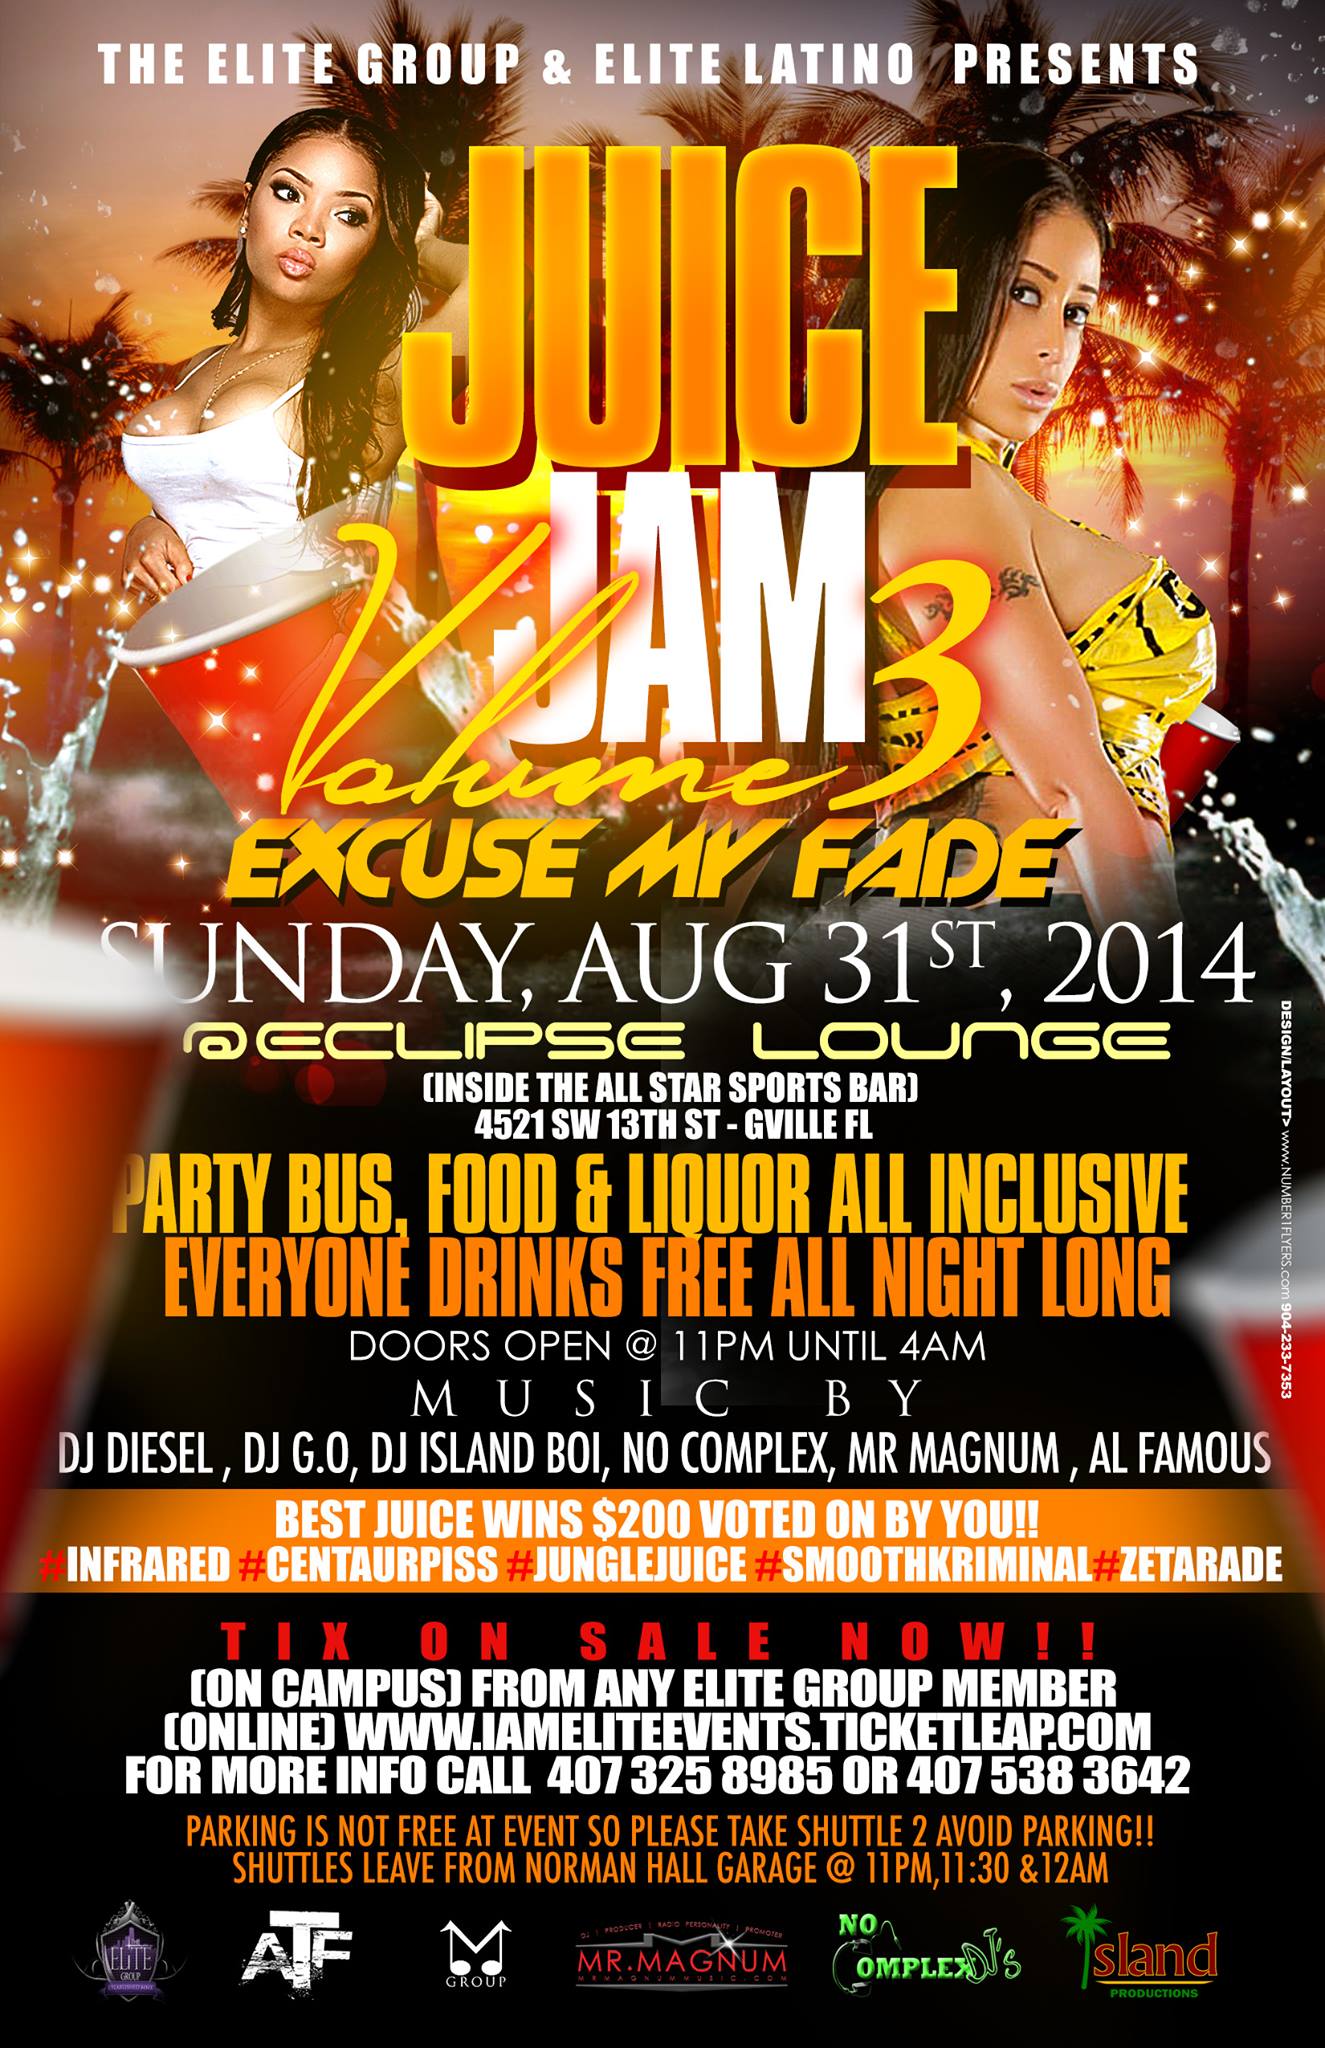 Juice Jam 3 - Excuse My Fade - All Incluse - Eclipse Lounge - Music By Gainesville's Best Reggae/Dancehall DJ, Mr. Magnum